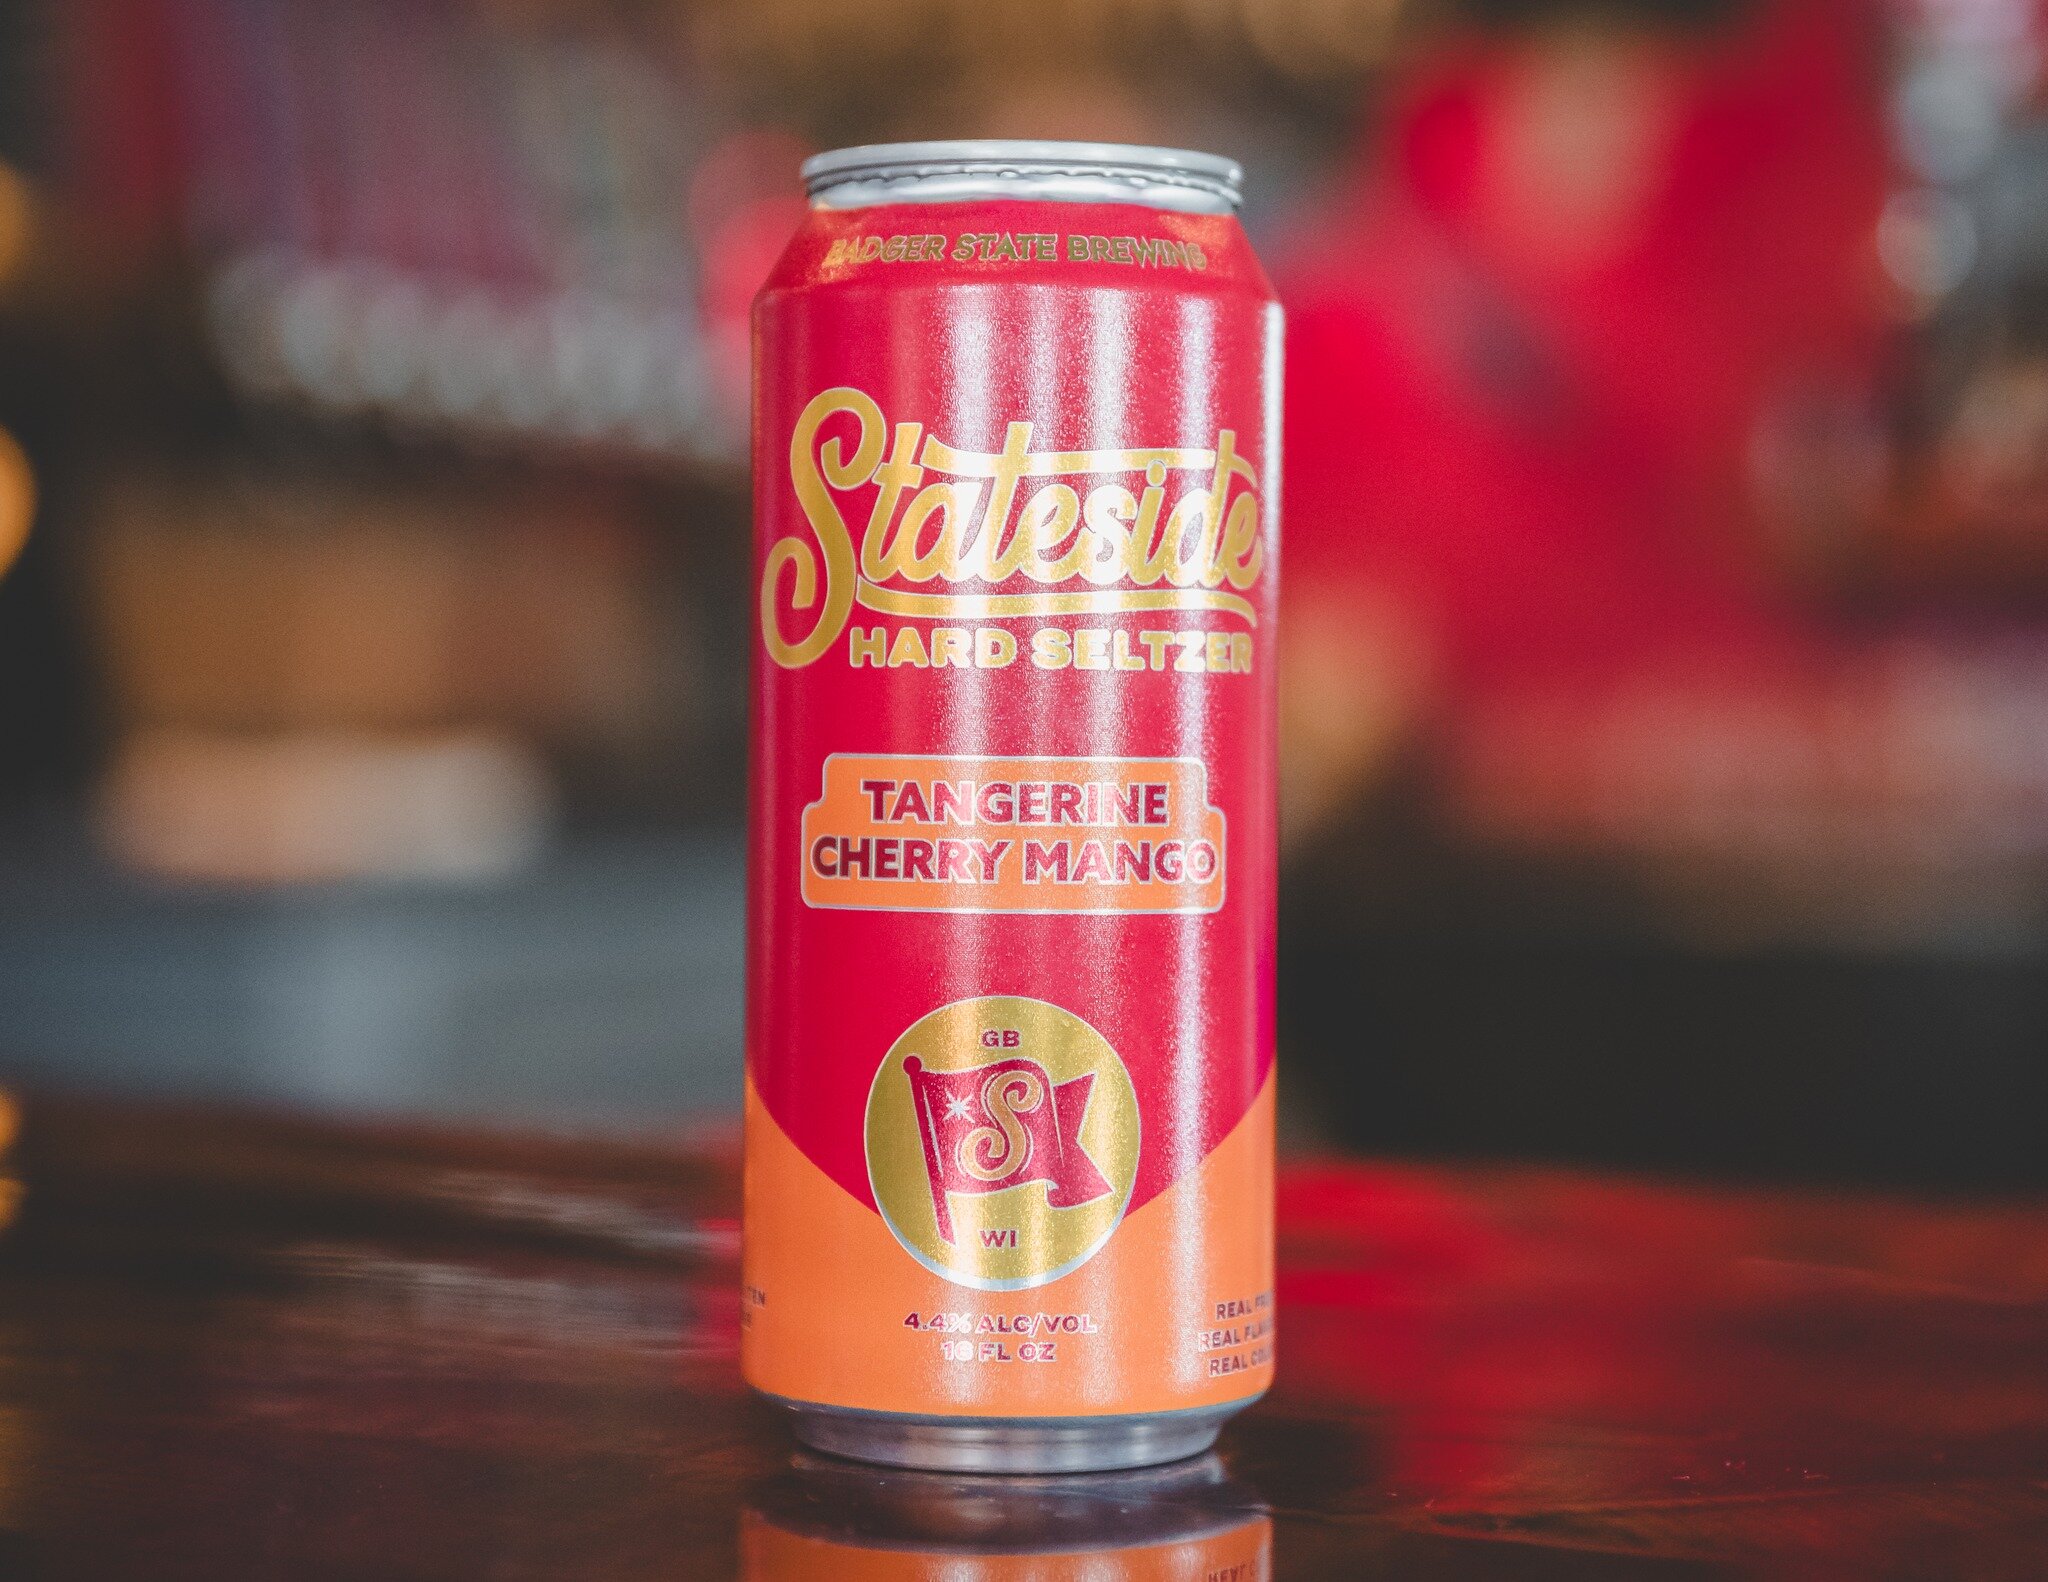 🥭🍒🍊NEW FLAVOR..WHO DIS? 🍒🥭🍊

Introducing Tangerine Cherry Mango hard seltzer.

Our newest flavor comes in at 4.4%, is gluten free,  made with real fruit like our other flavors and available on draft &amp; in cans starting tomorrow! 

Stop by th